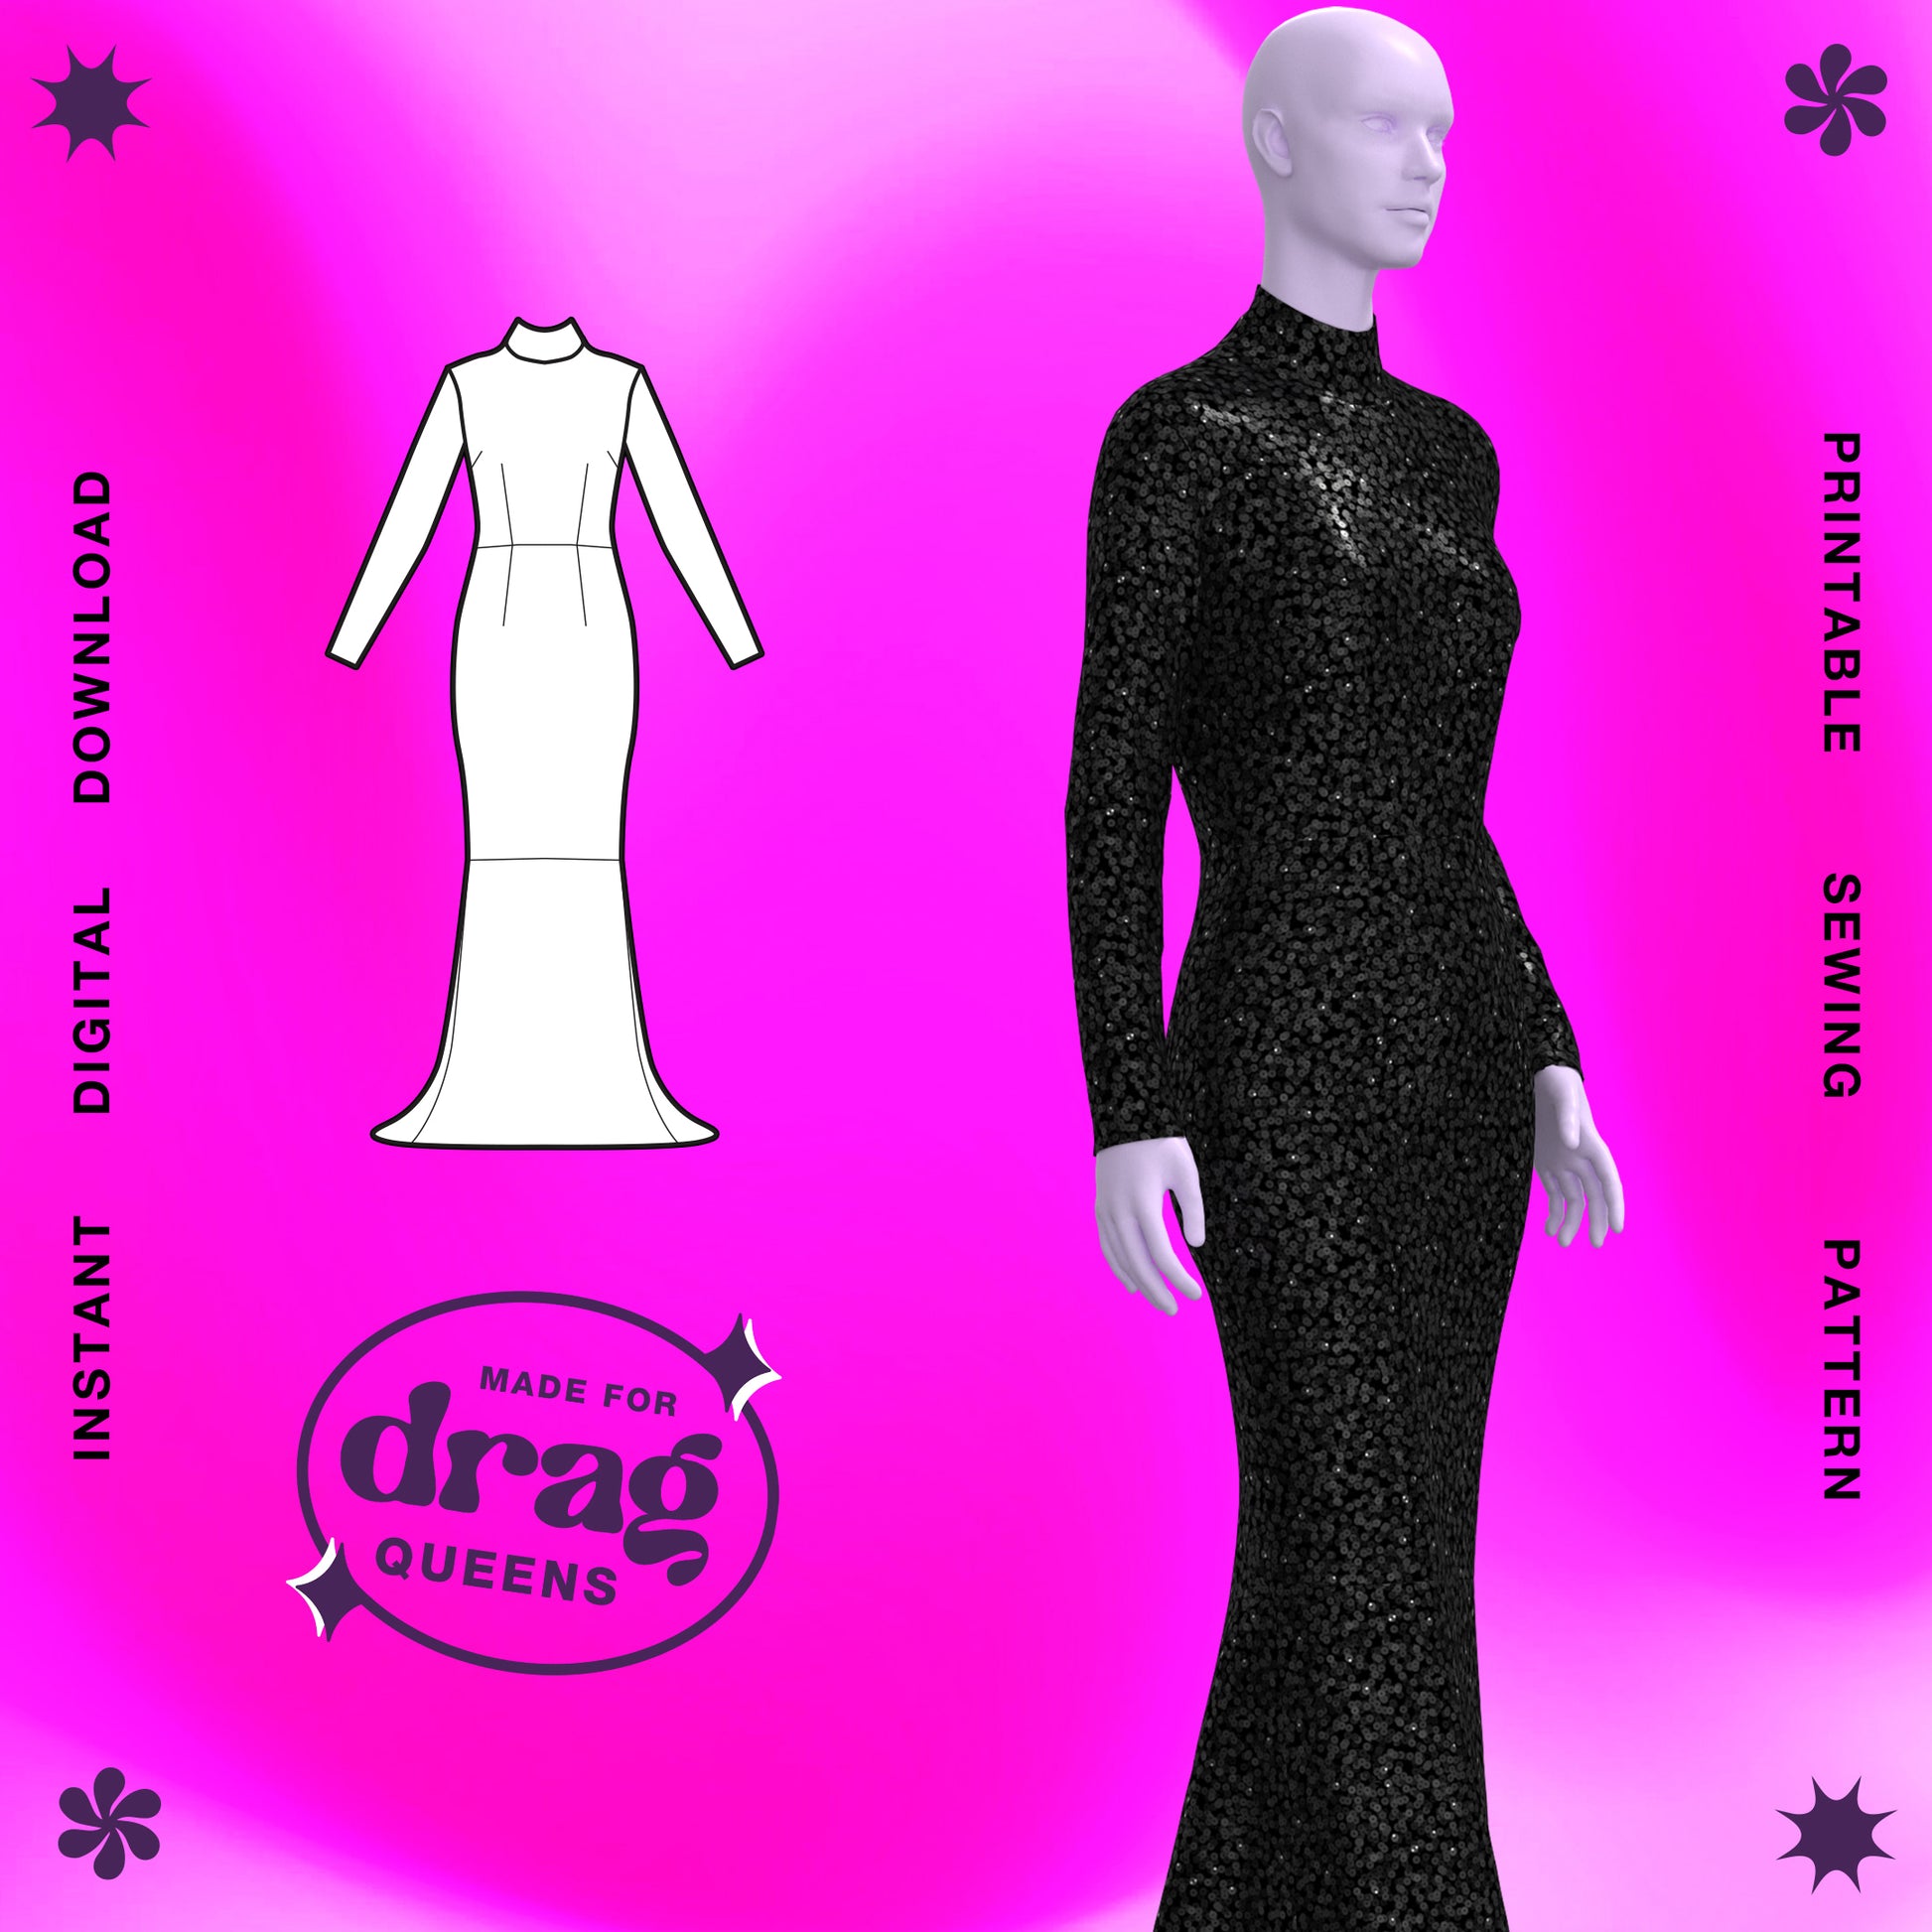 Katkow Long Sleeve Gown Sewing Pattern for Drag Queens Costume, Fashion, Wedding, Prom, Fantasy, Fairy, Gala, Evening Dress, Skirt, Train thumb